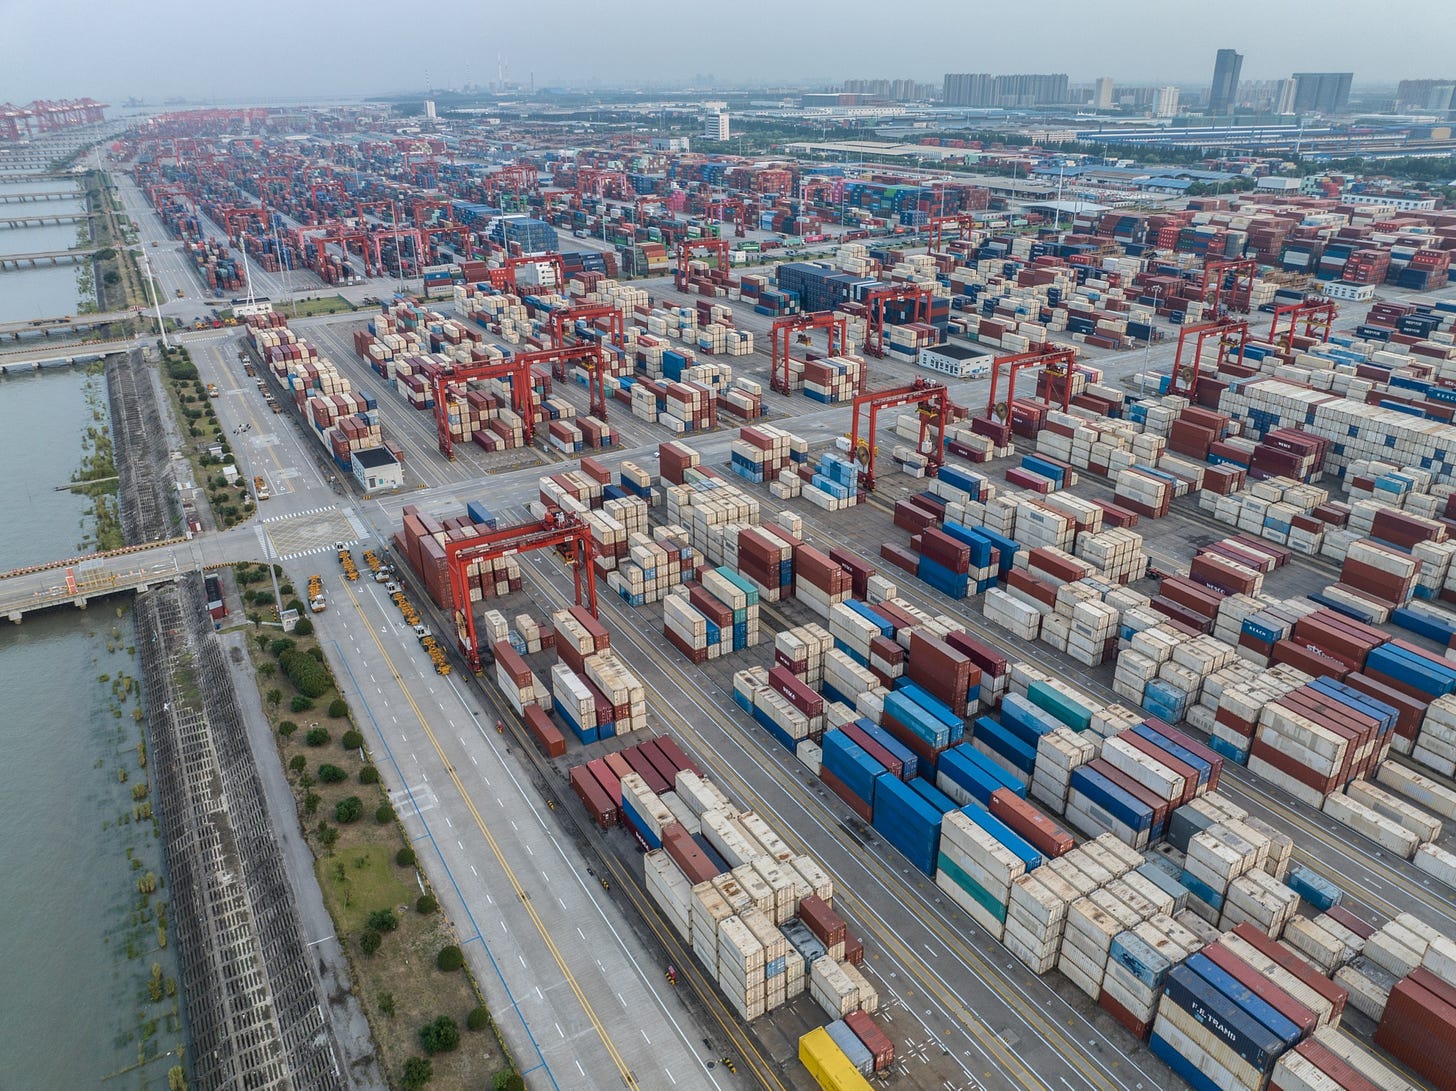 Shipping containers in China’s Jiangsu Province. The economic&nbsp;slowdown in recent months is sounding alarm bells across the world.